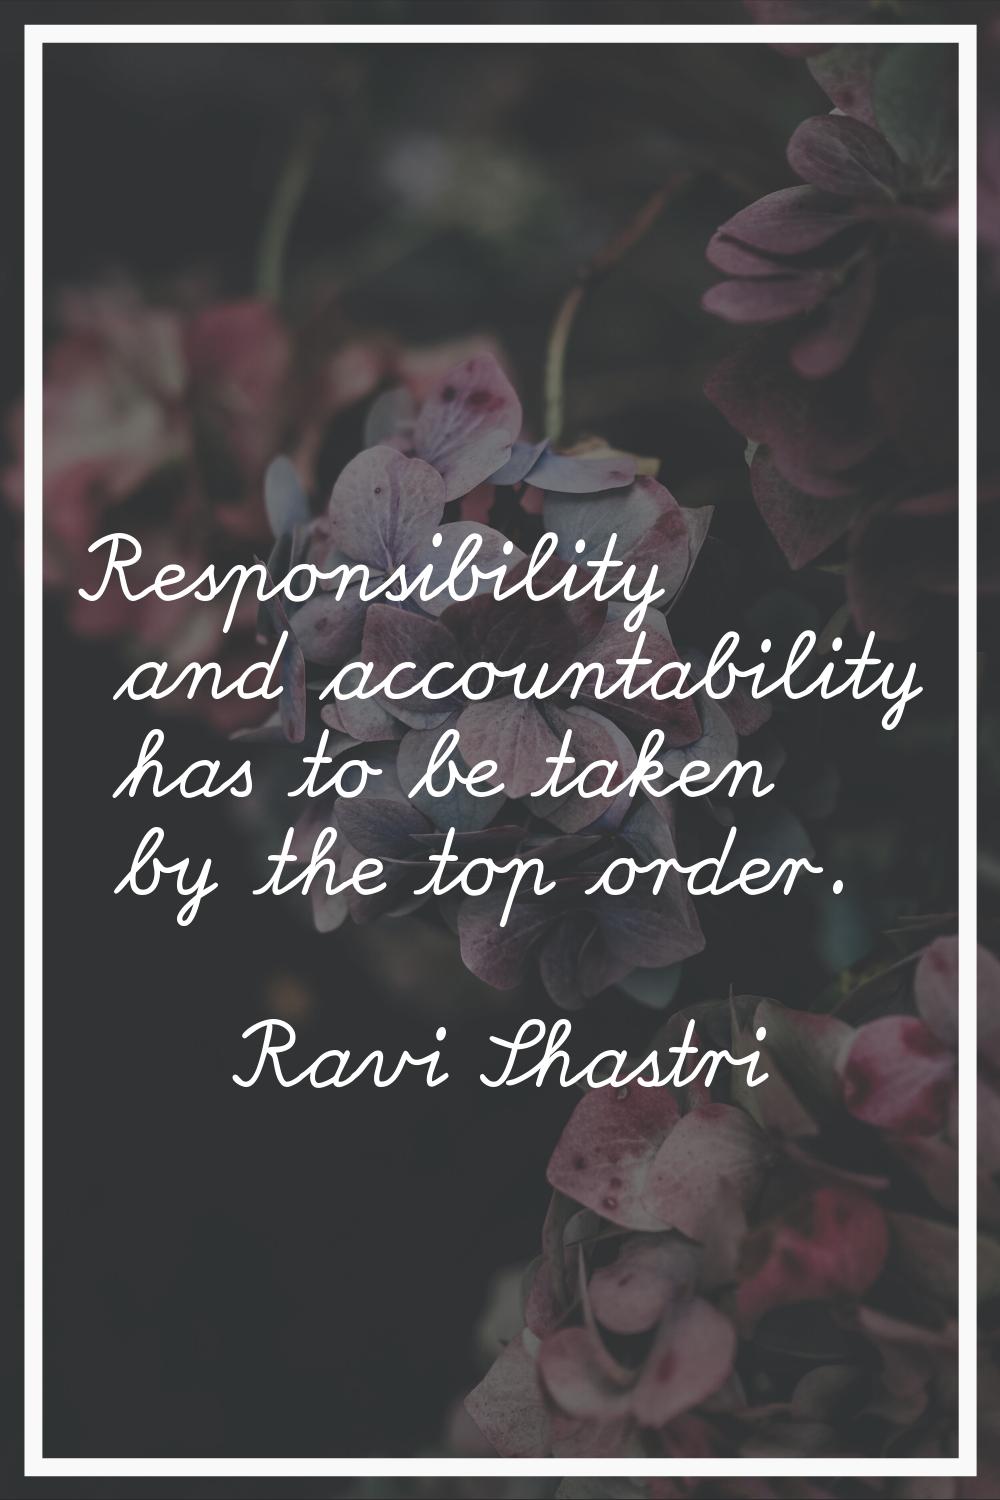 Responsibility and accountability has to be taken by the top order.